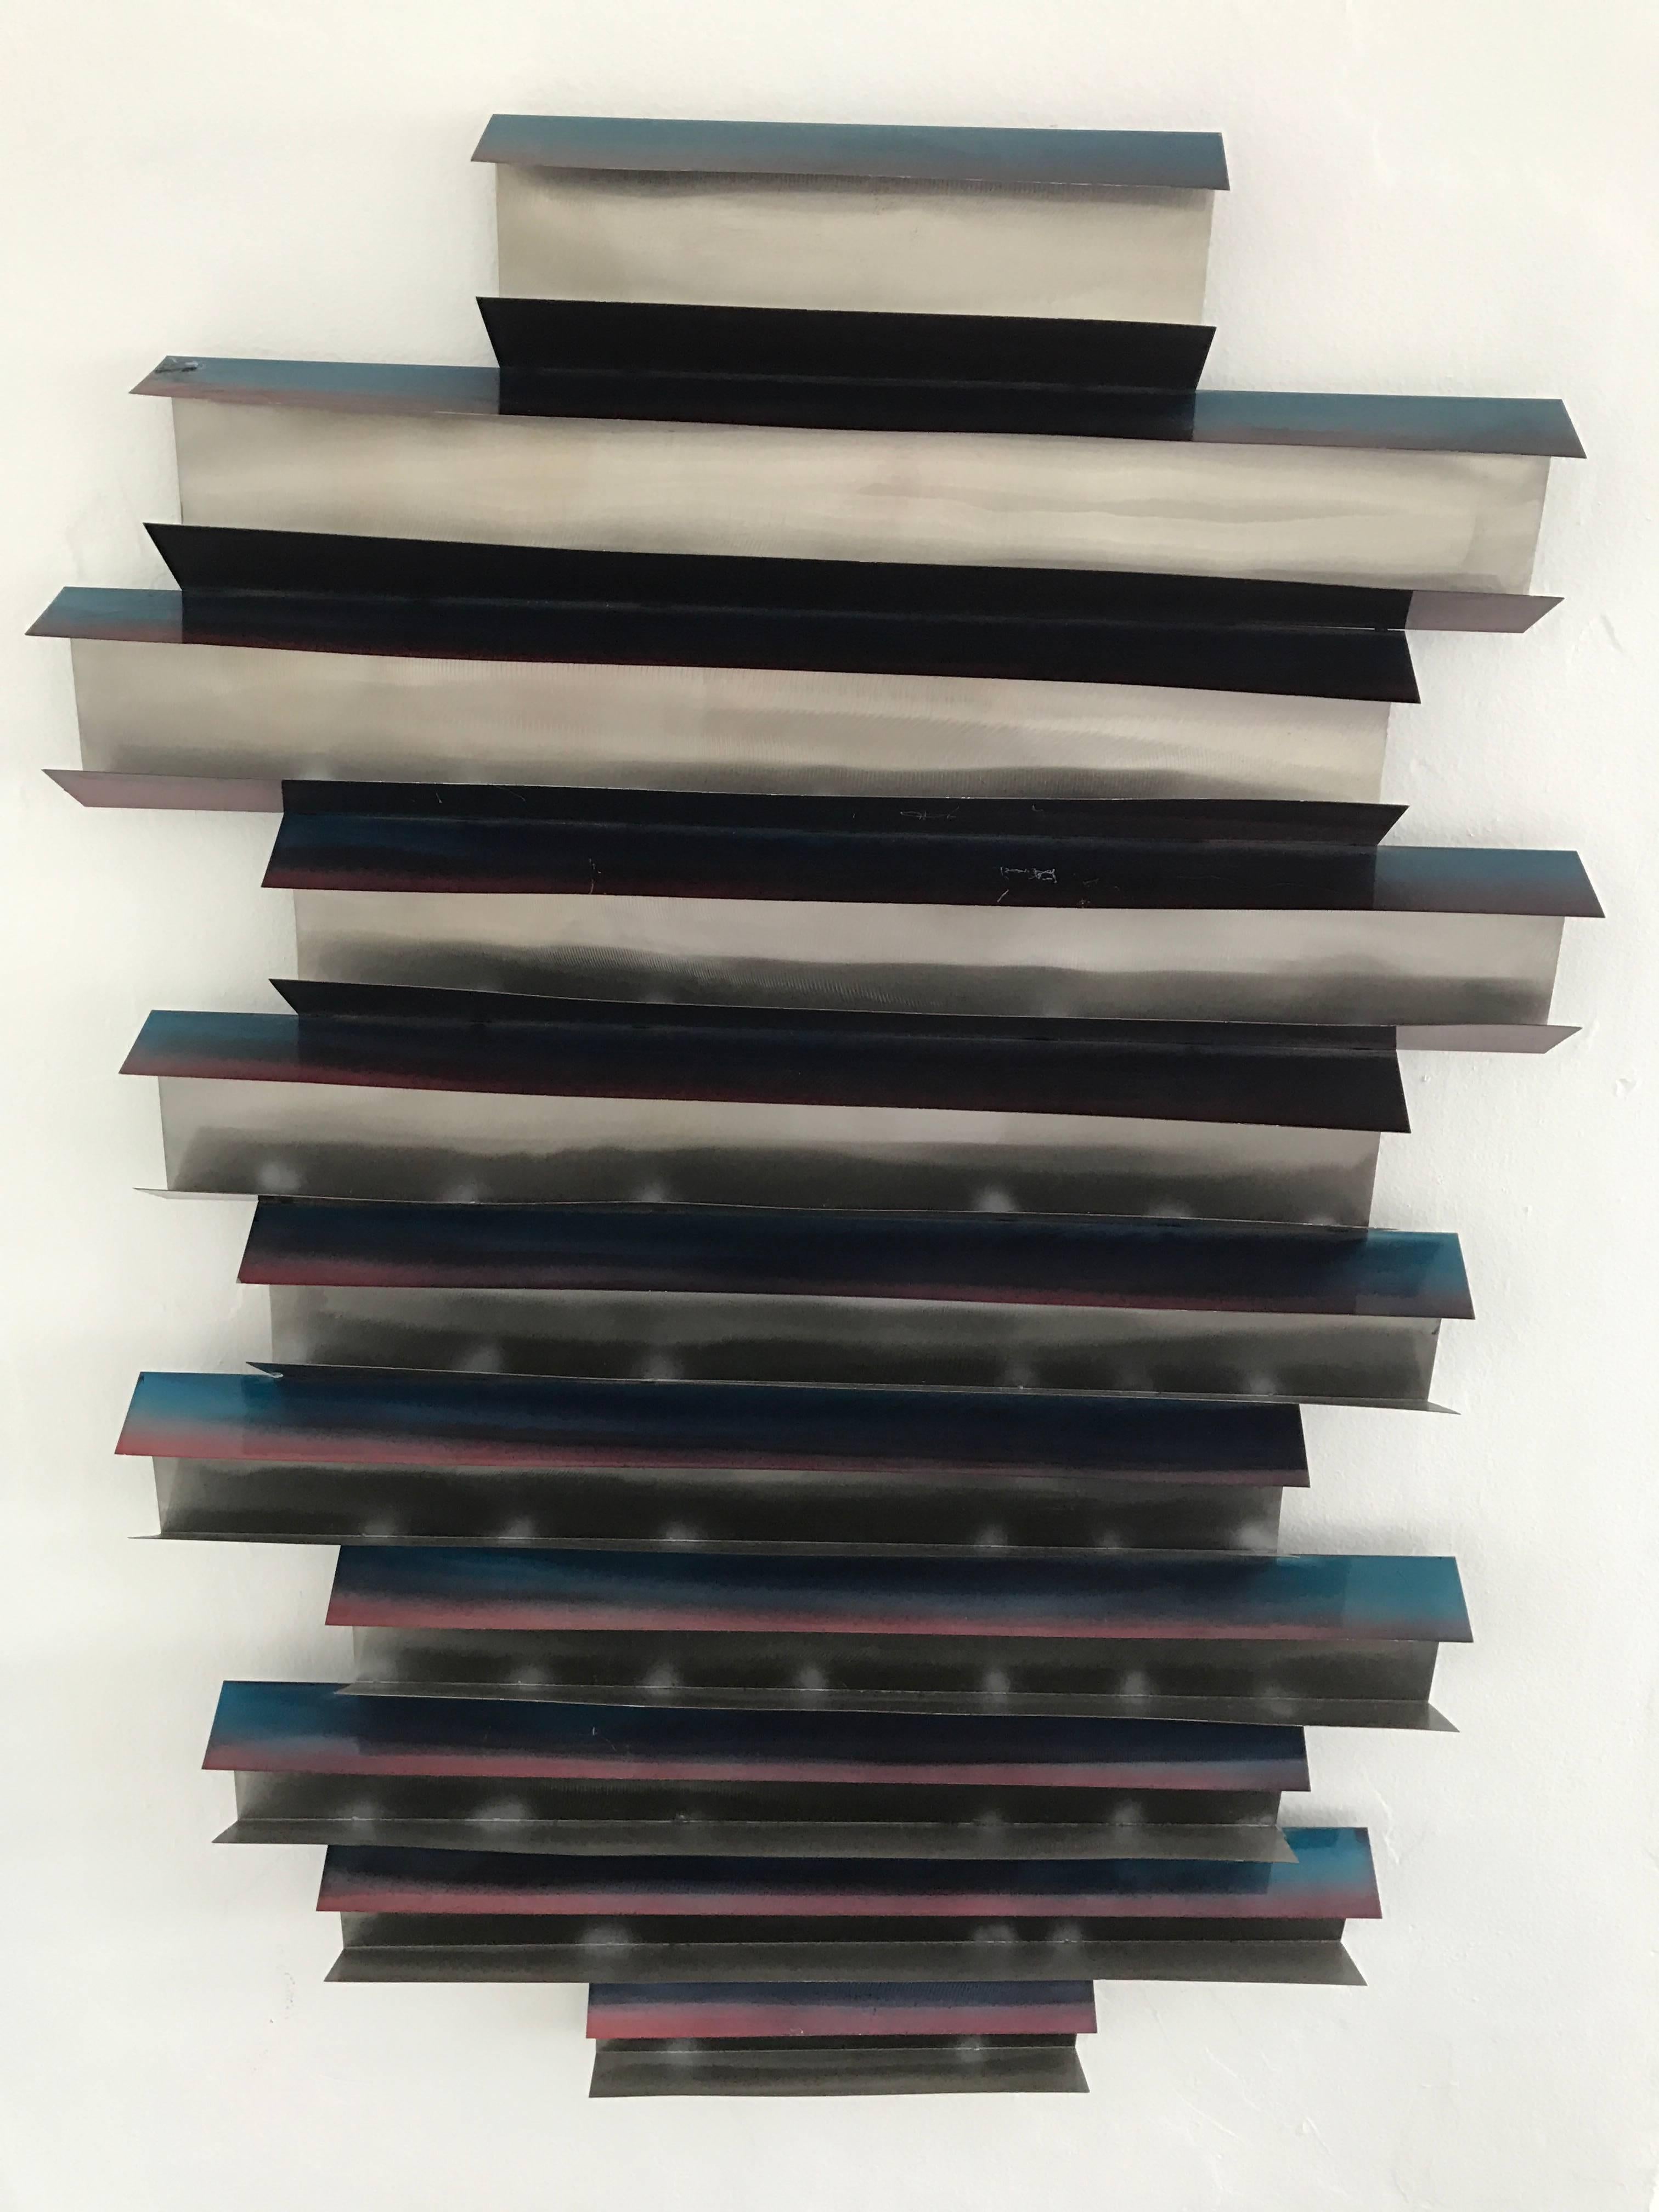 Folded steel wall sculptures with pink and blue highlights by C. Jere 2007, signed. Can hang vertical or horizontal.